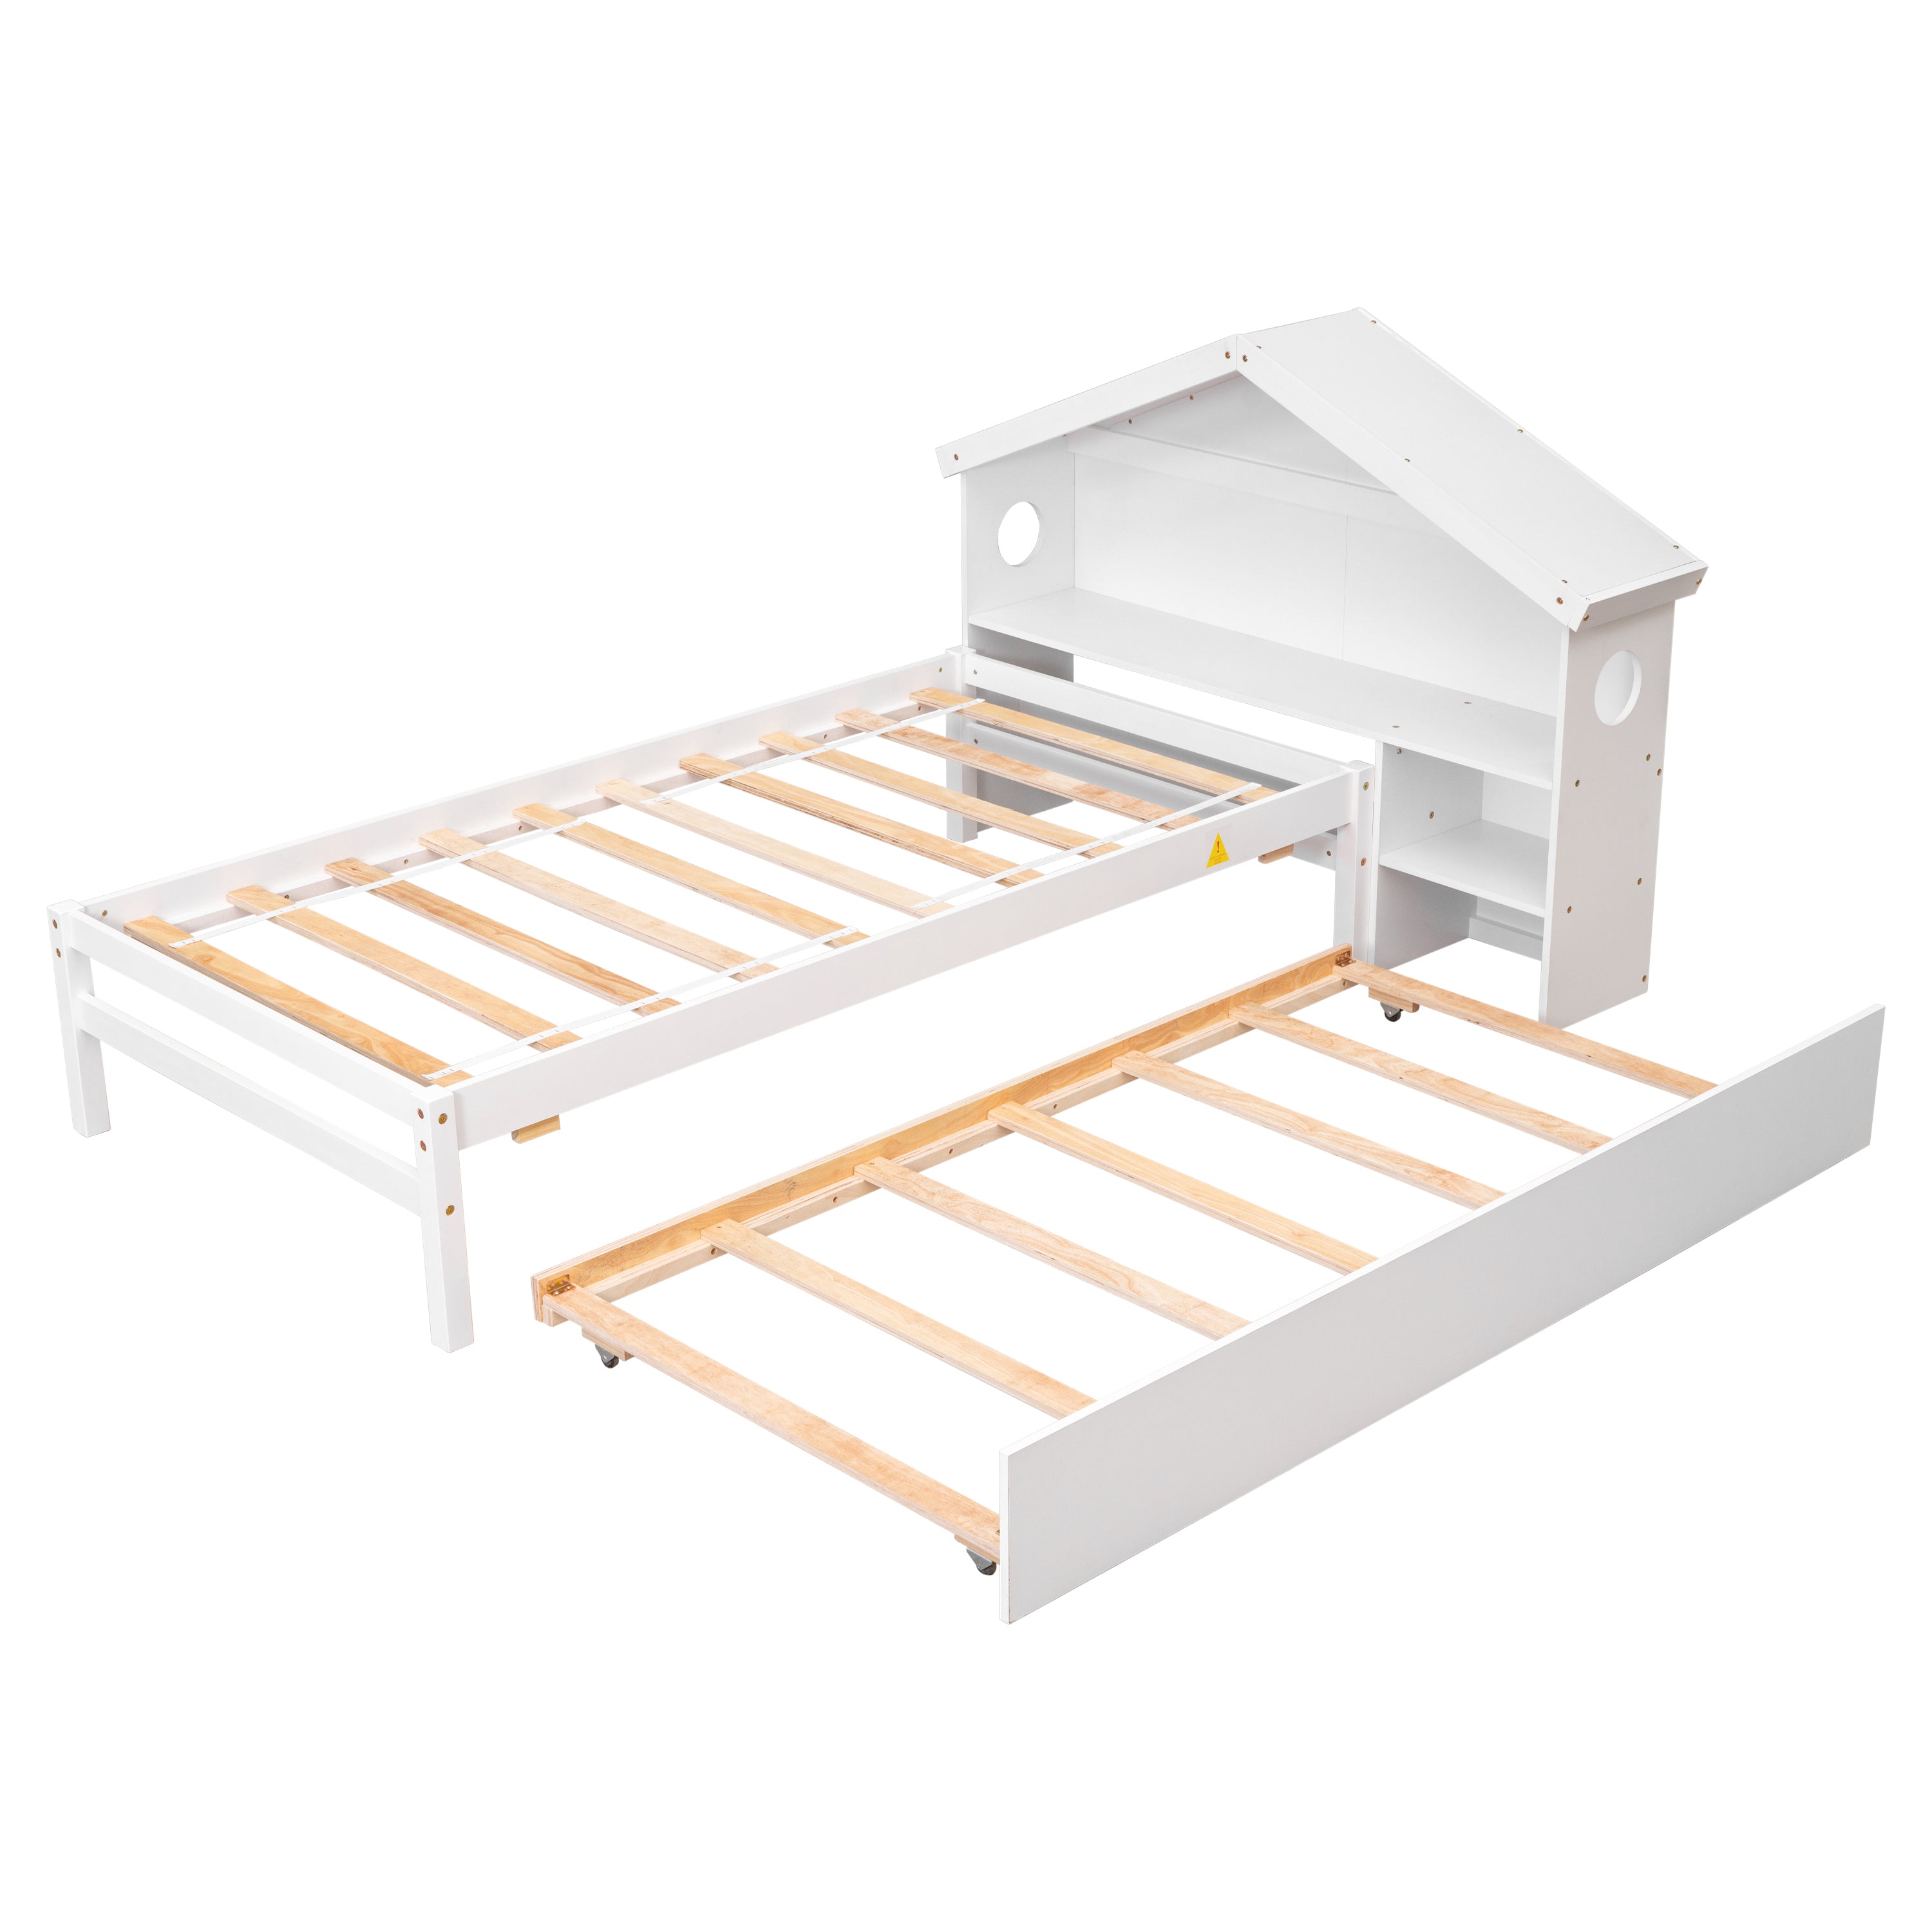 ZNTS Twin Storage House Bed for kids with Bedside Table, Trundle, White W50457989